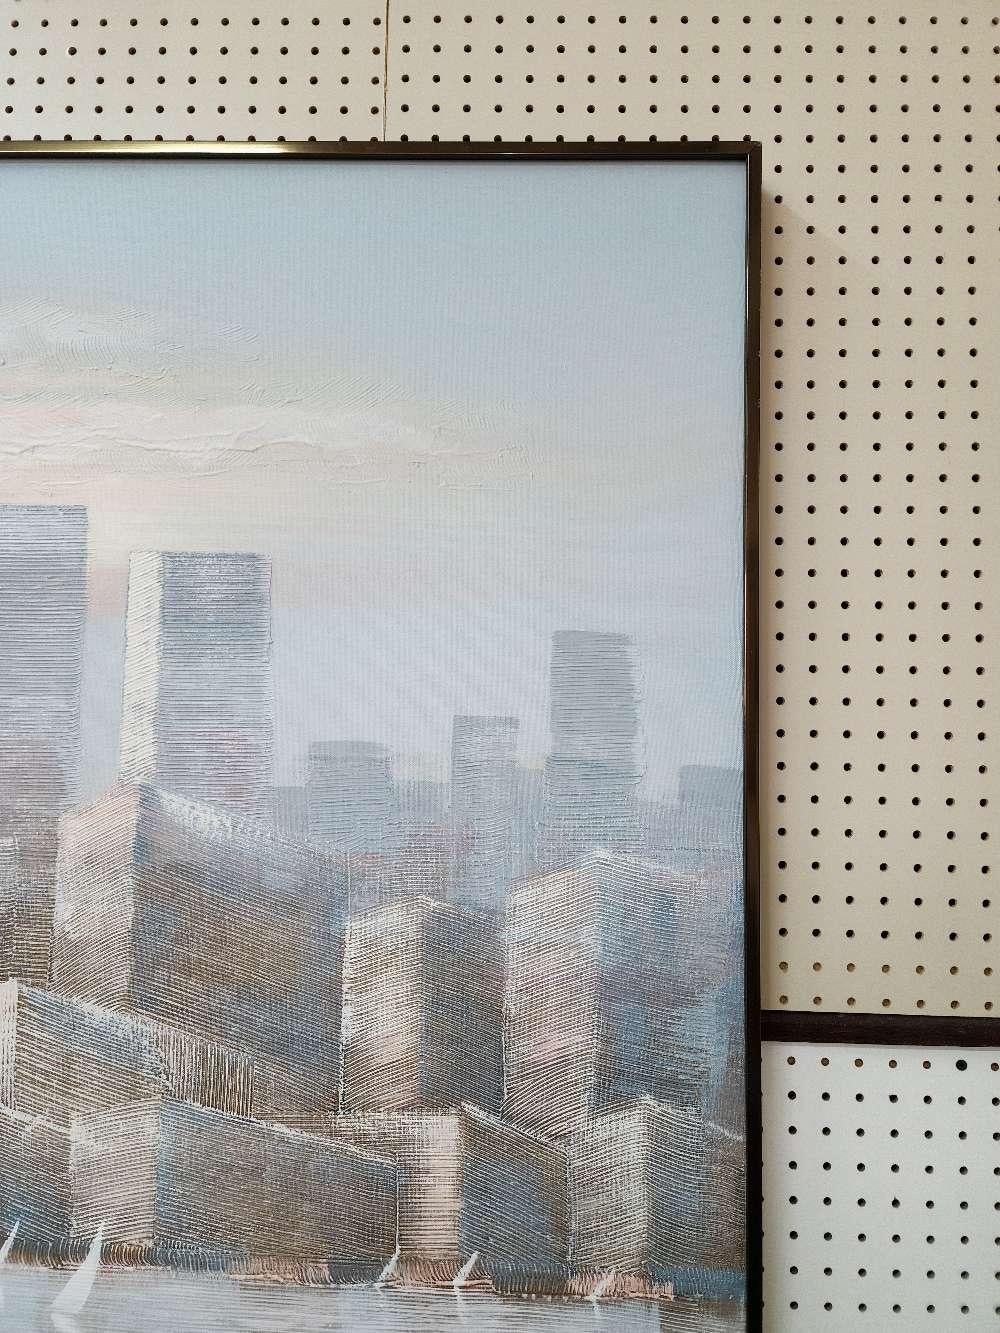 Large Abstract Textured Cityscape w/ Sailboats by Lee Reynolds in Pastels/Grays For Sale 1